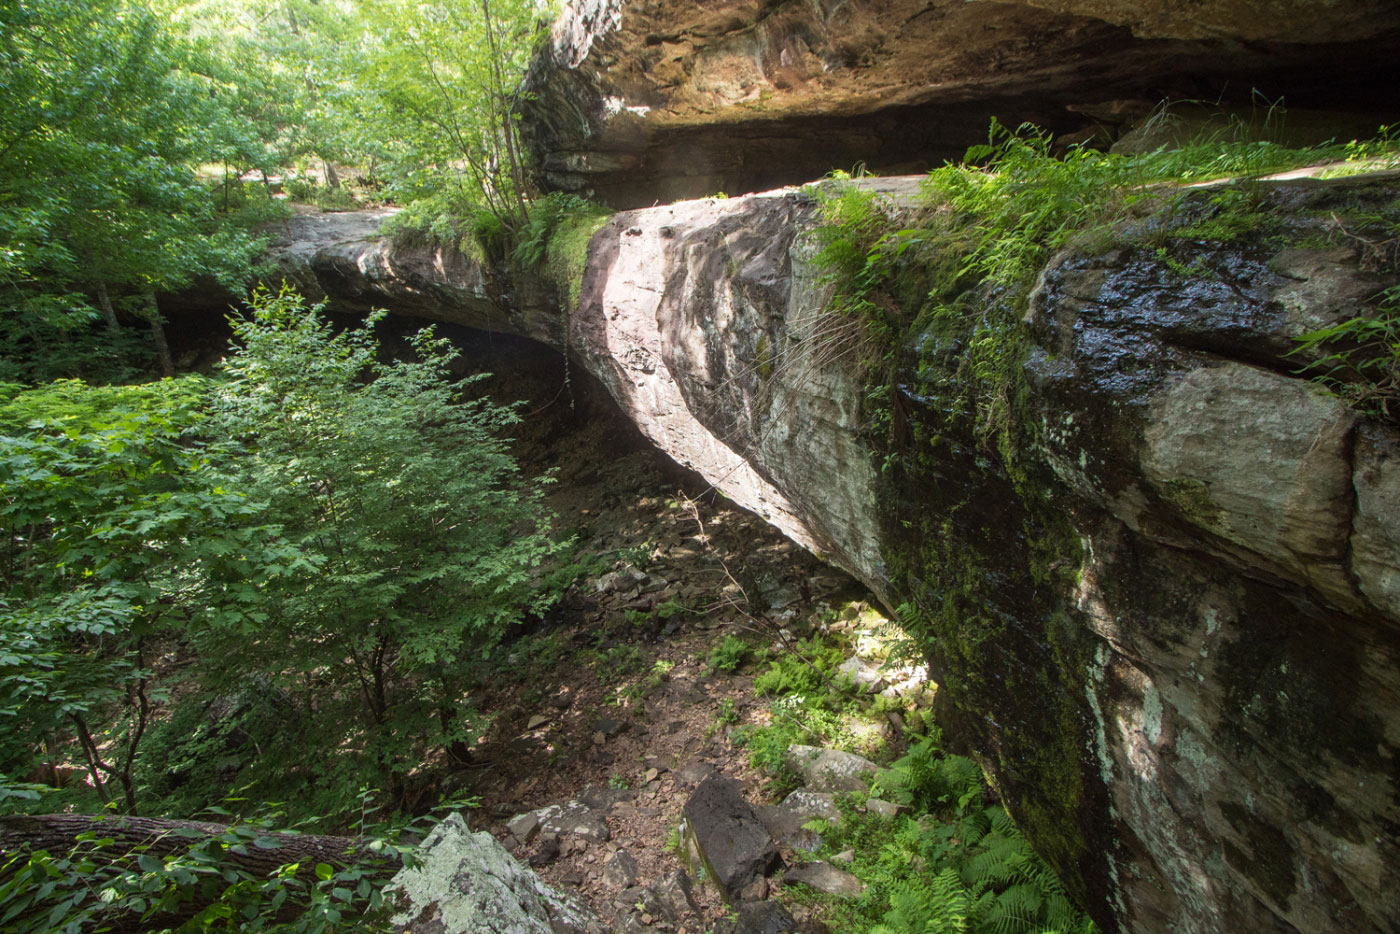 Hike Hideout Hollow in Buffalo National River, Arkansas - Stav is Lost